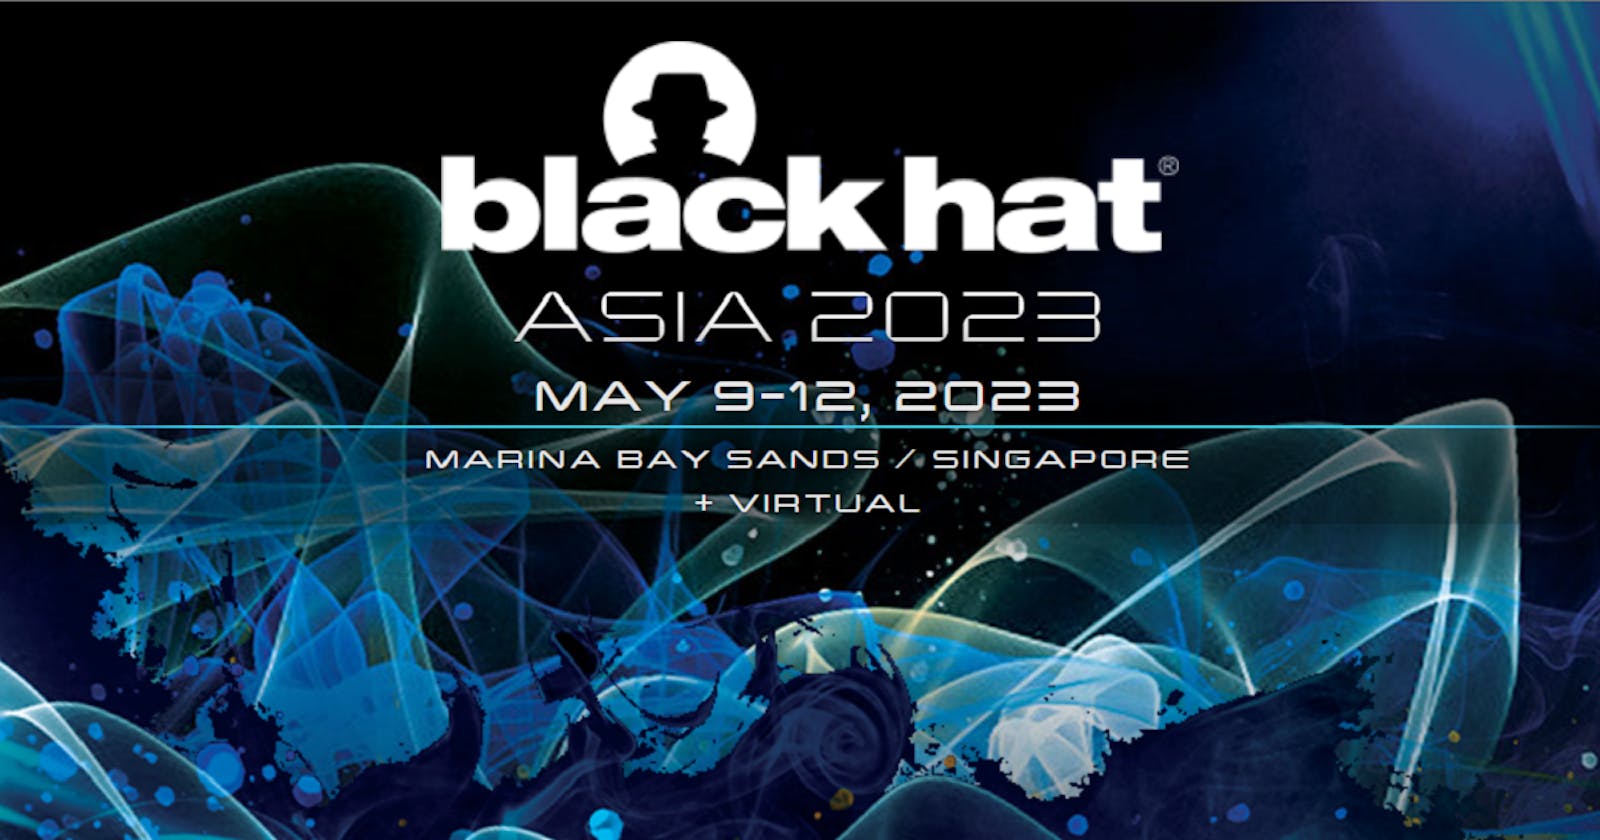 Reflections on Black Hat Asia 2023: Learning, Networking, and Inspiration